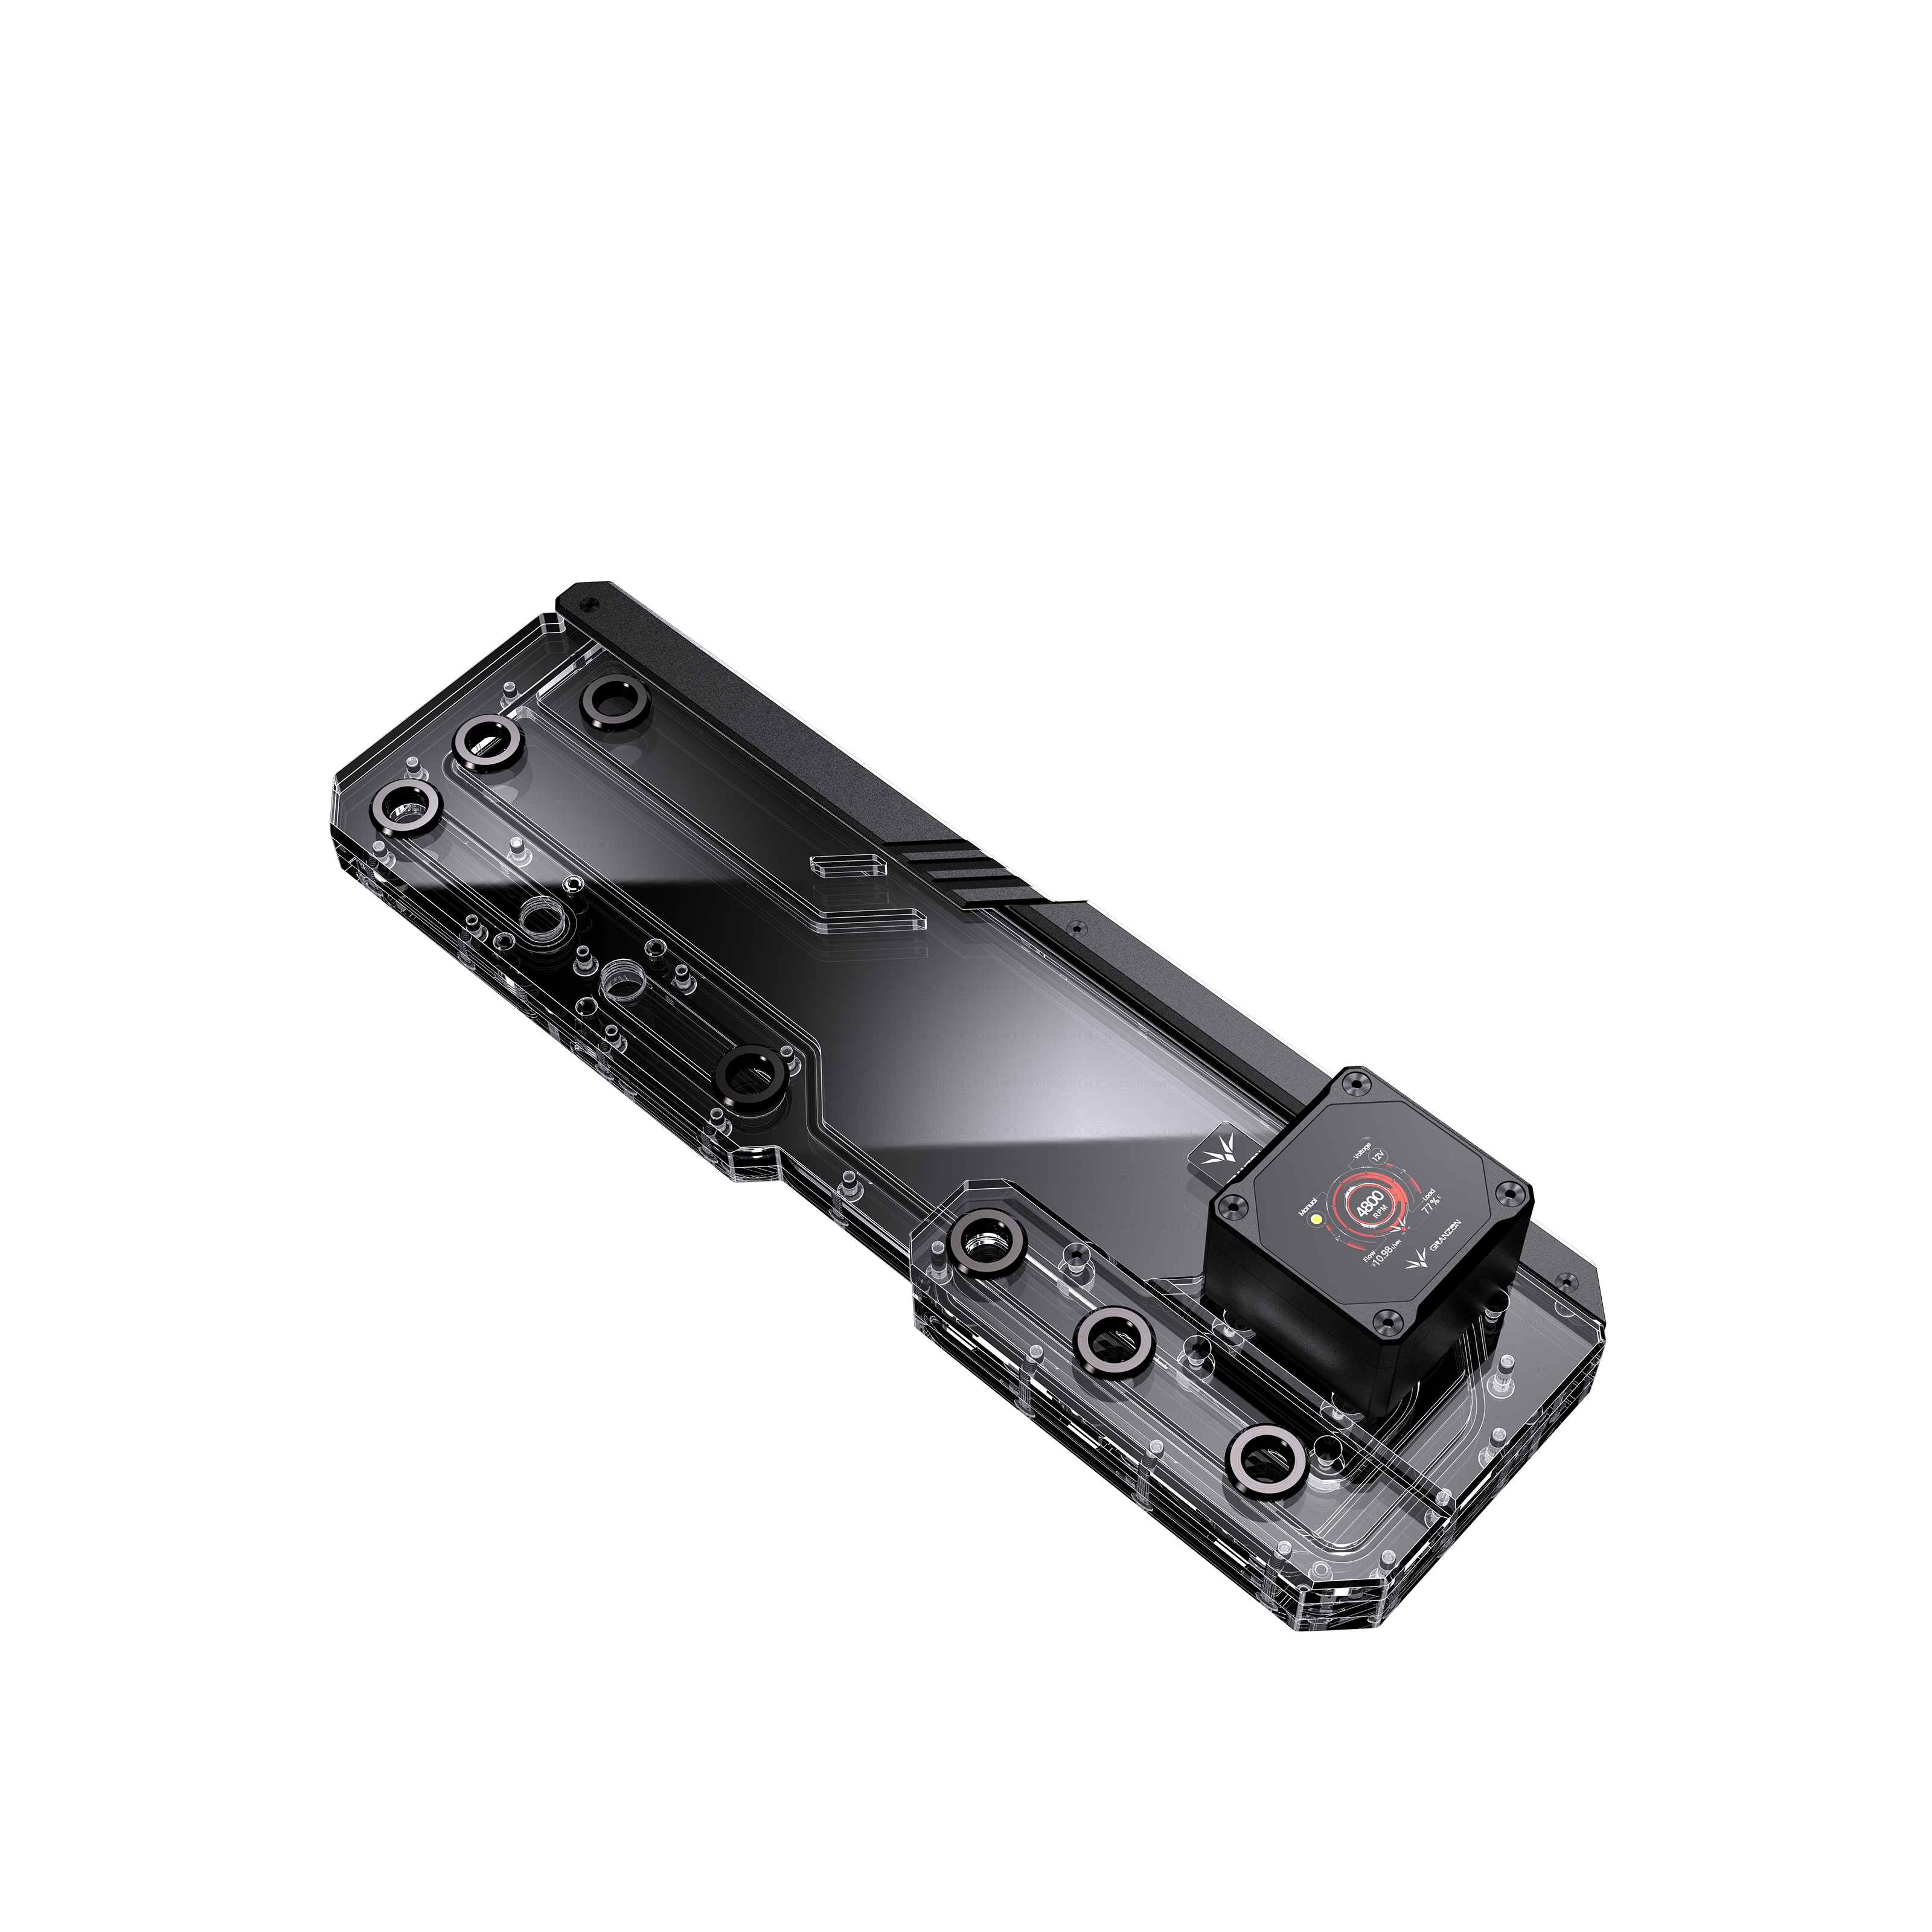 Granzon Advanced Distro Plate For Asus ROG Hyperion GR701 Case, Armor Type  Acrylic Waterway Board Combo DDC Pump, 5V A-RGB, GC-AS-GR701 at formulamod  sale